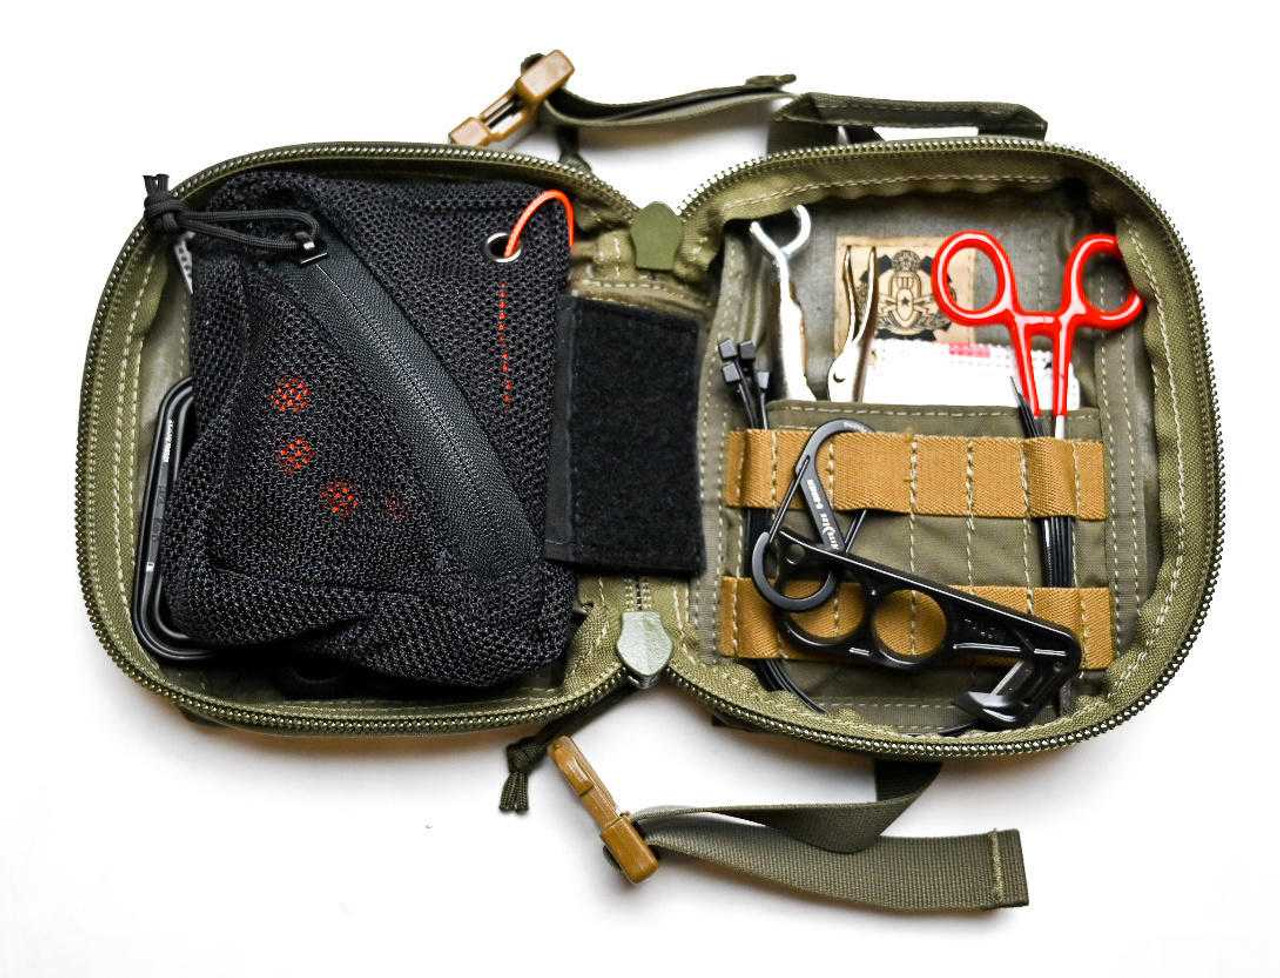 Maxpedition Medic Patch Swat